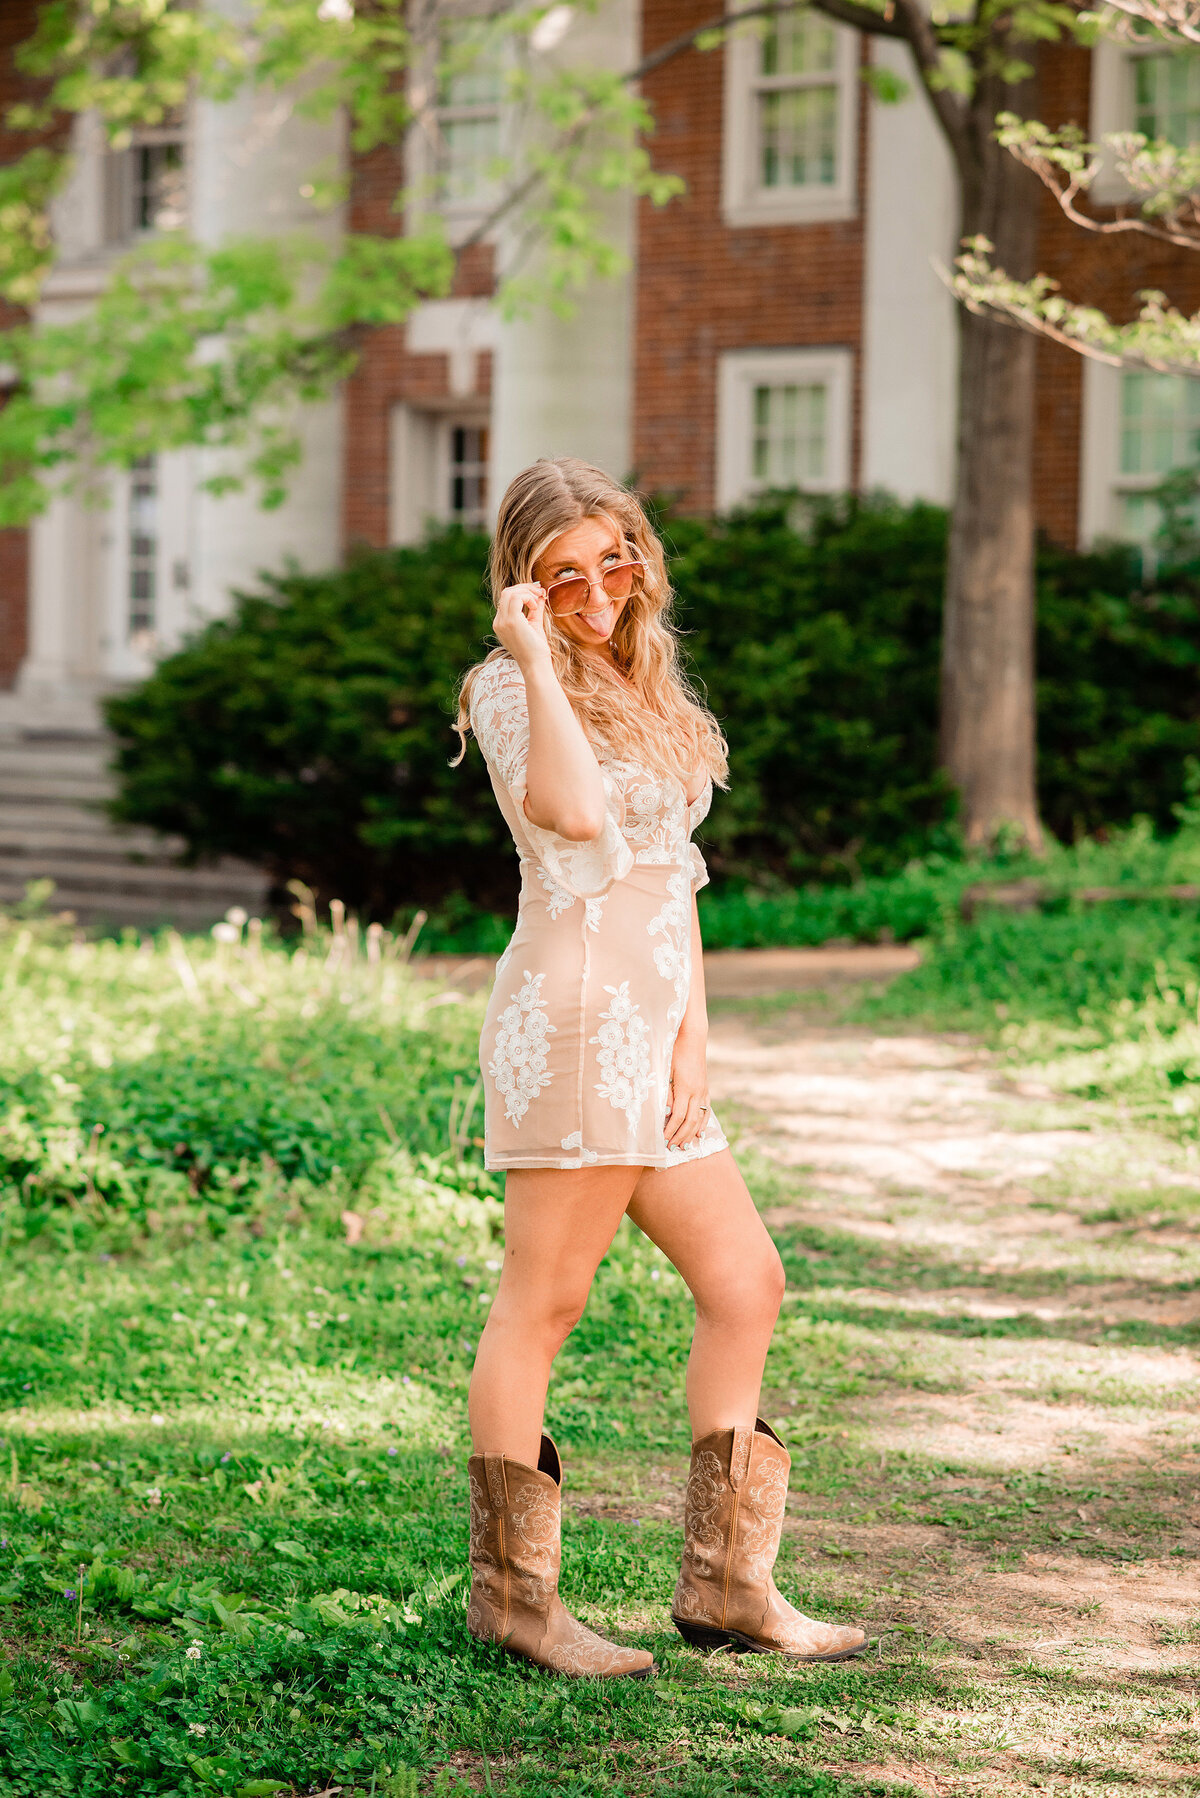 Vanderbilt Senior wearing lace dress and cowboy boots with sunglasses making funny face at camera